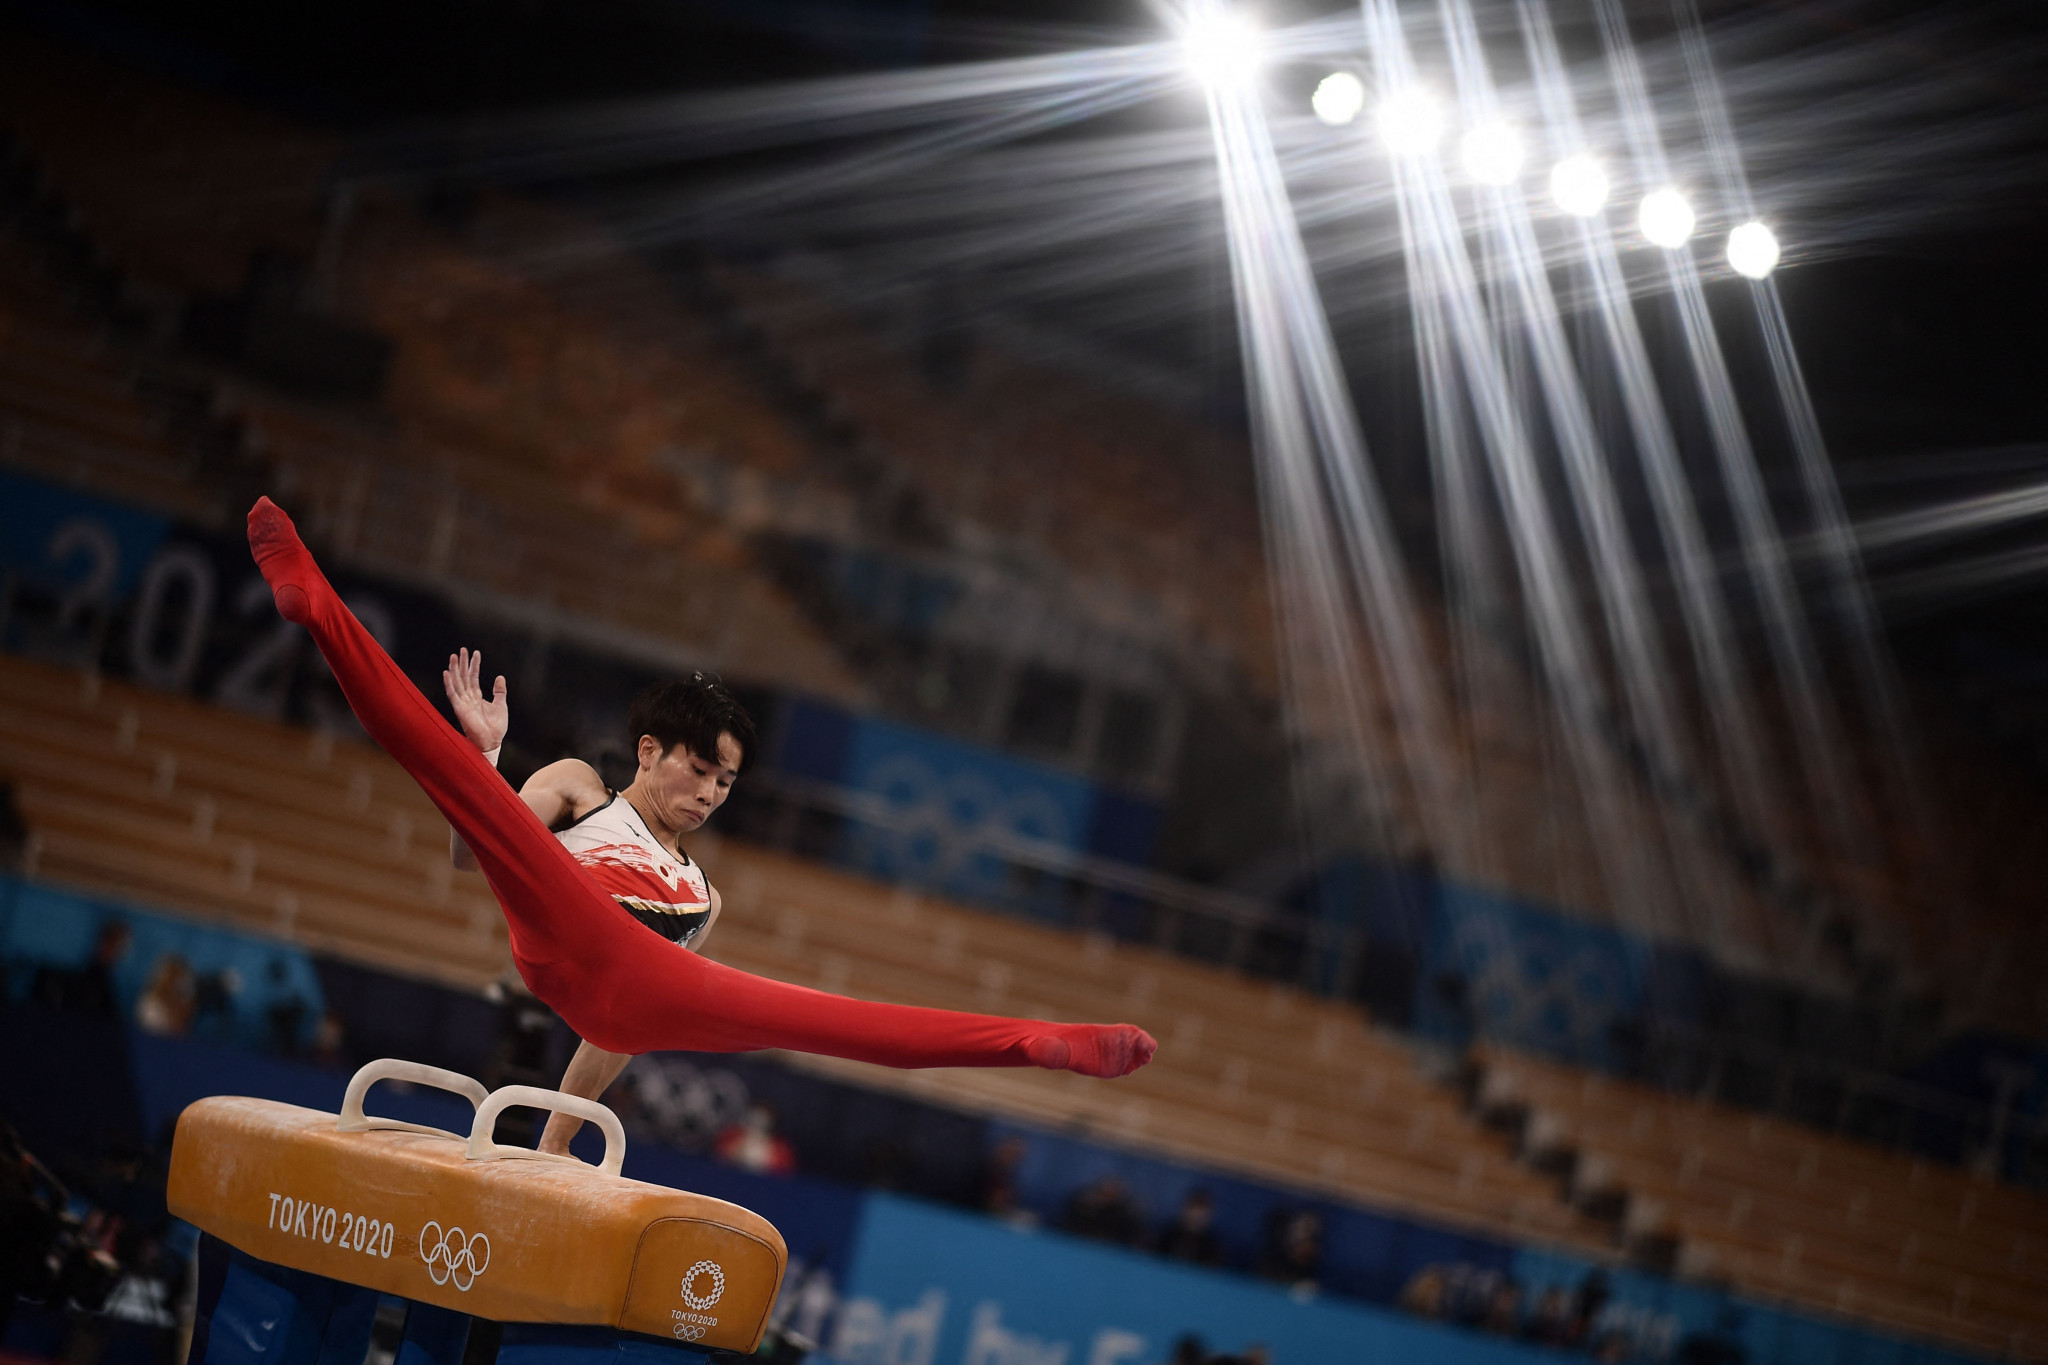 Tokyo 2020 Olympic Games: Day three of competition